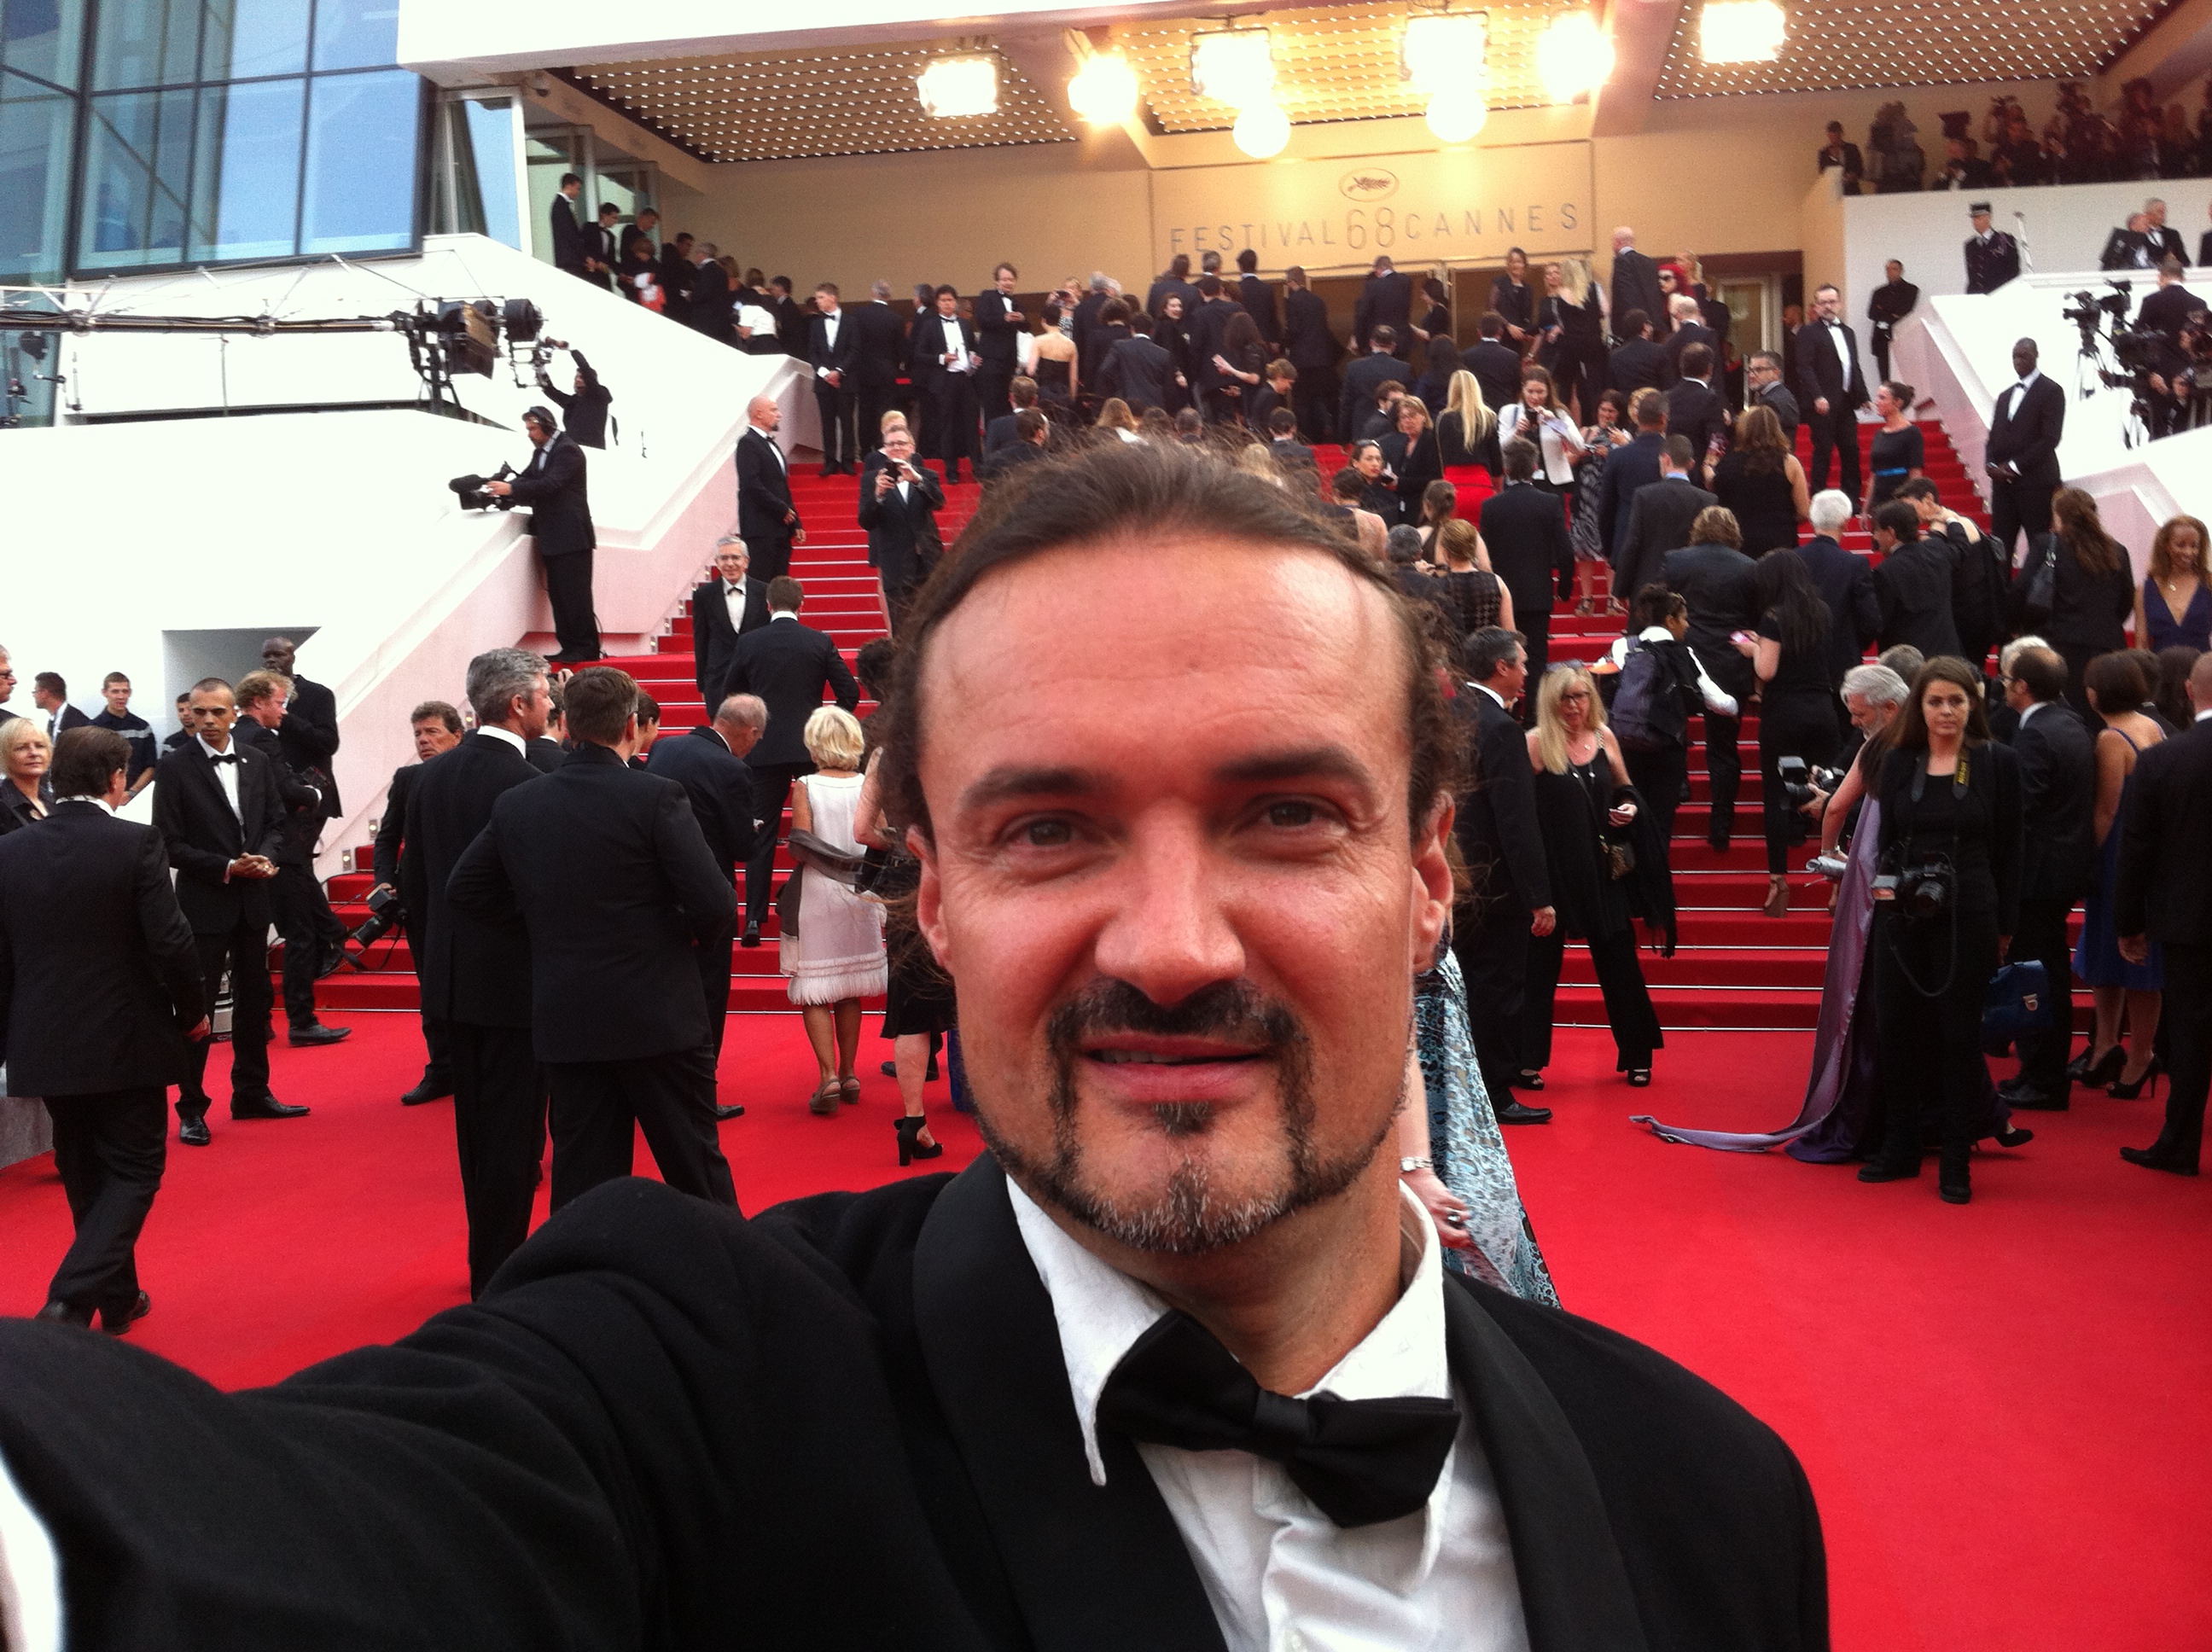 On the red carpet at the Cannes Film Festival